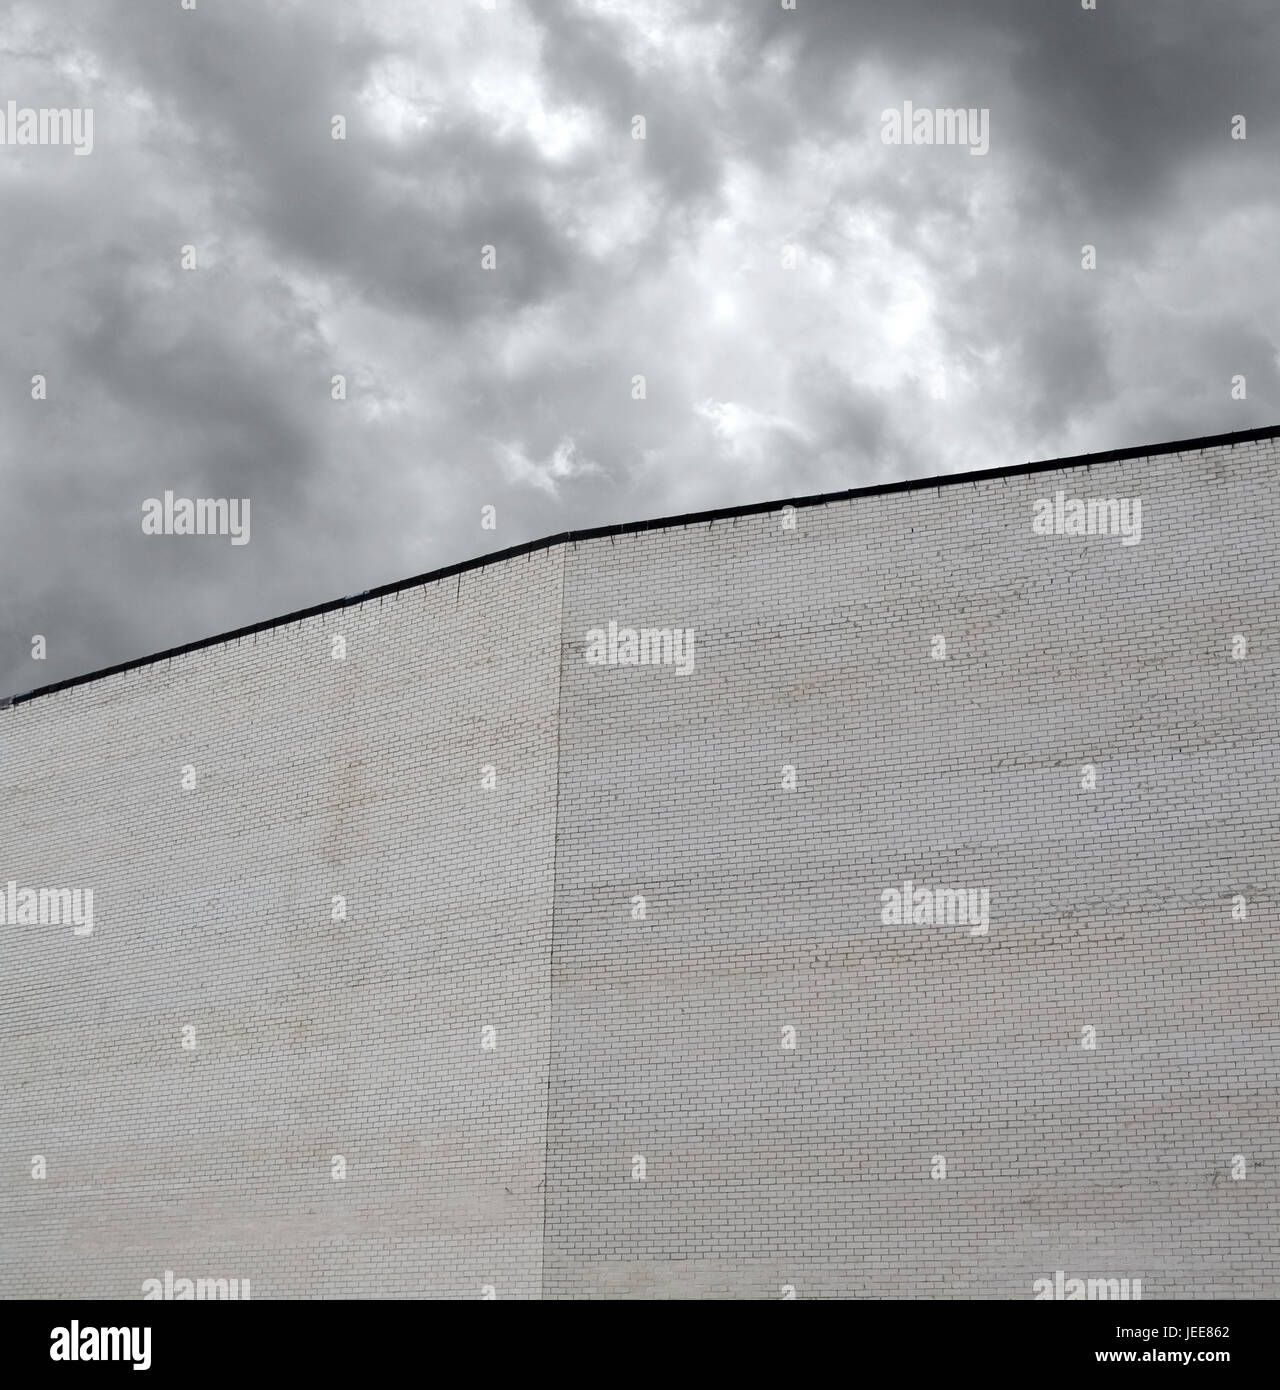 Conception, wall, white stones, cloudied day, Stock Photo